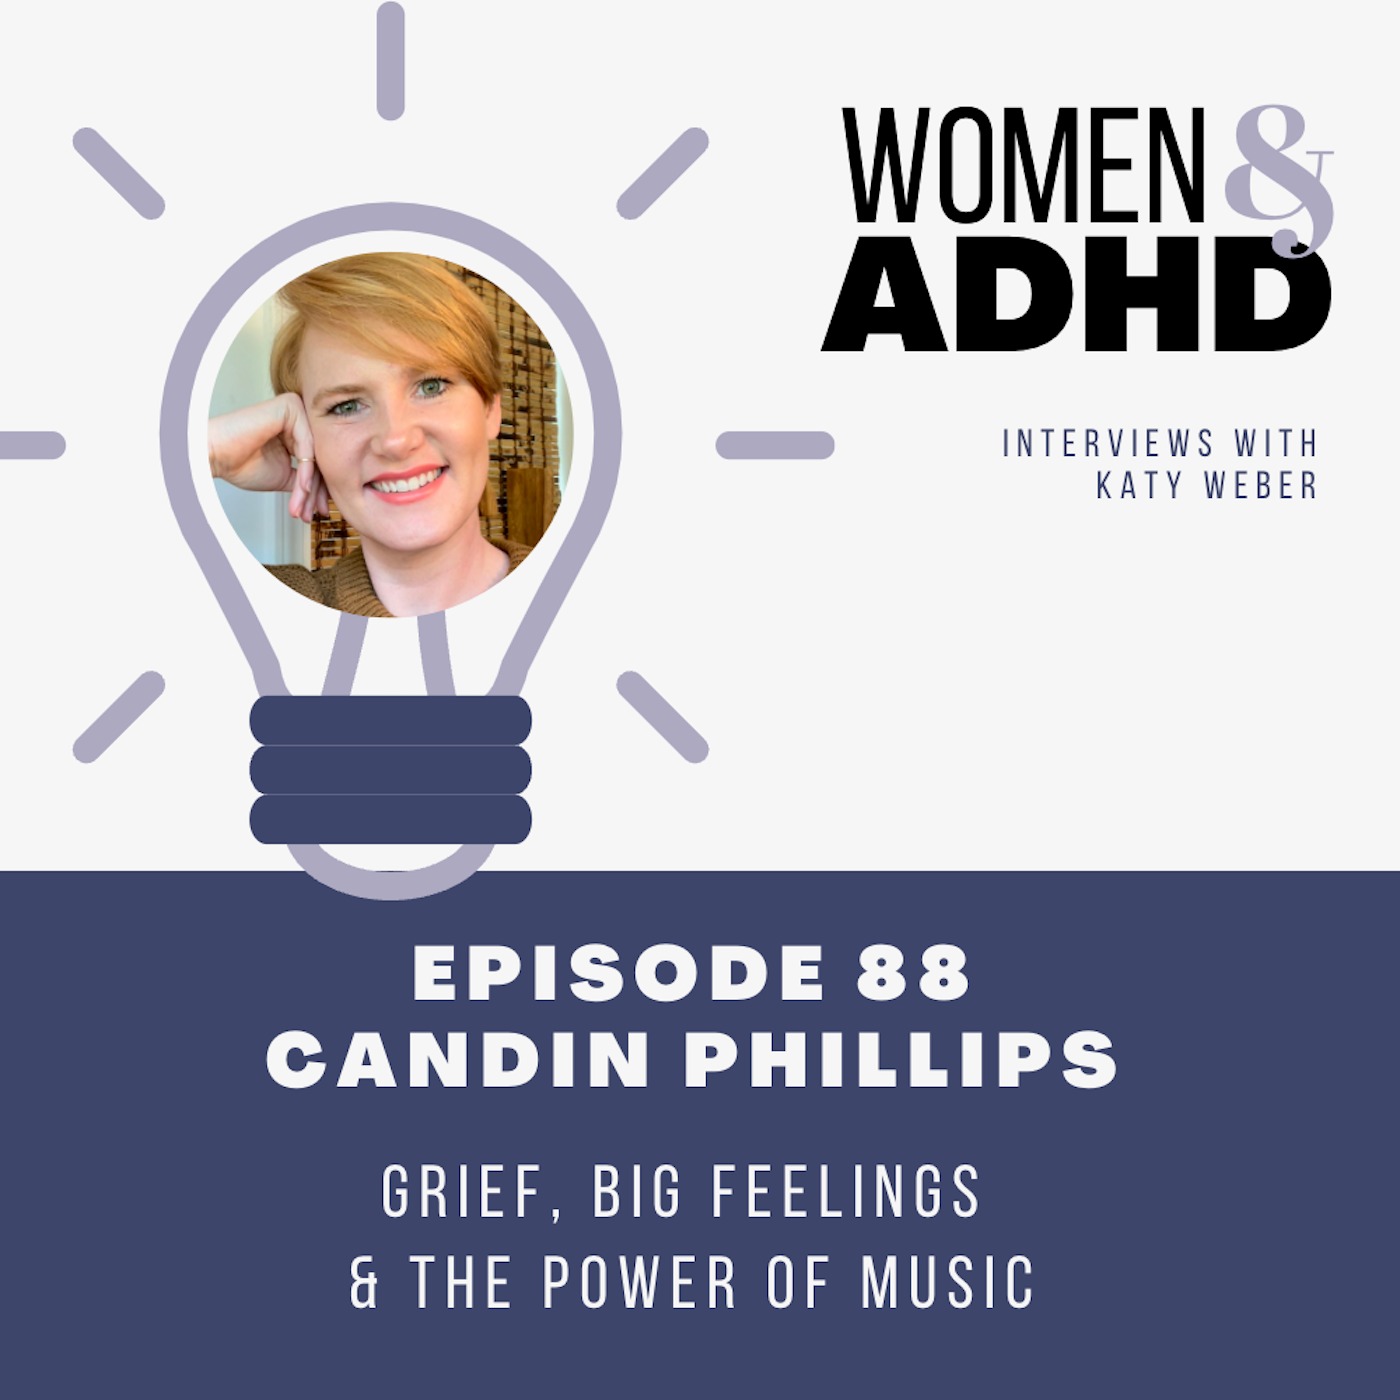 Candin Phillips: Grief, big feelings & the power of music